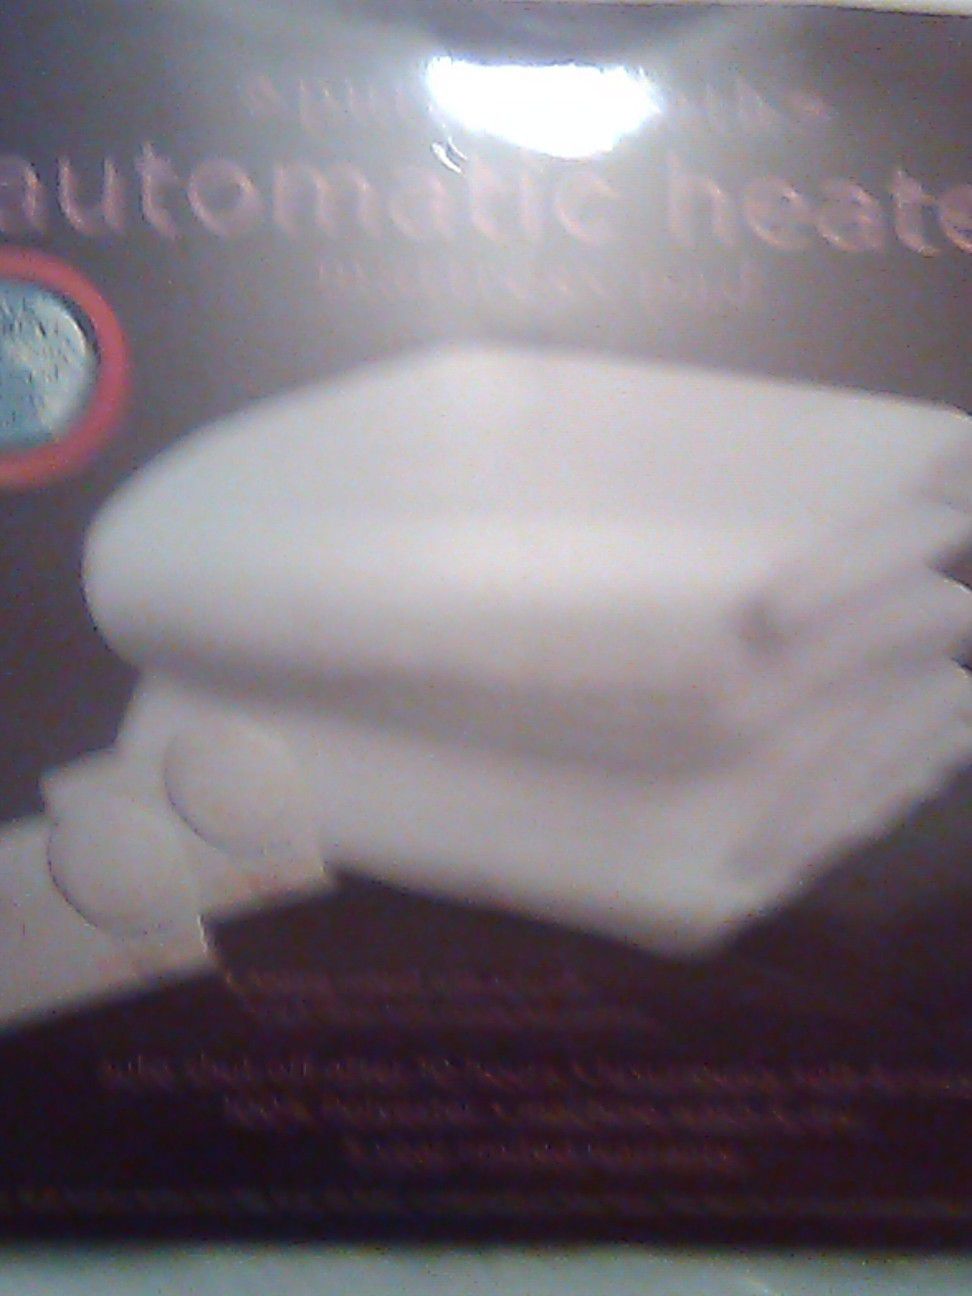 Brand new full size heated mattress cover by pure warmth mattress cover